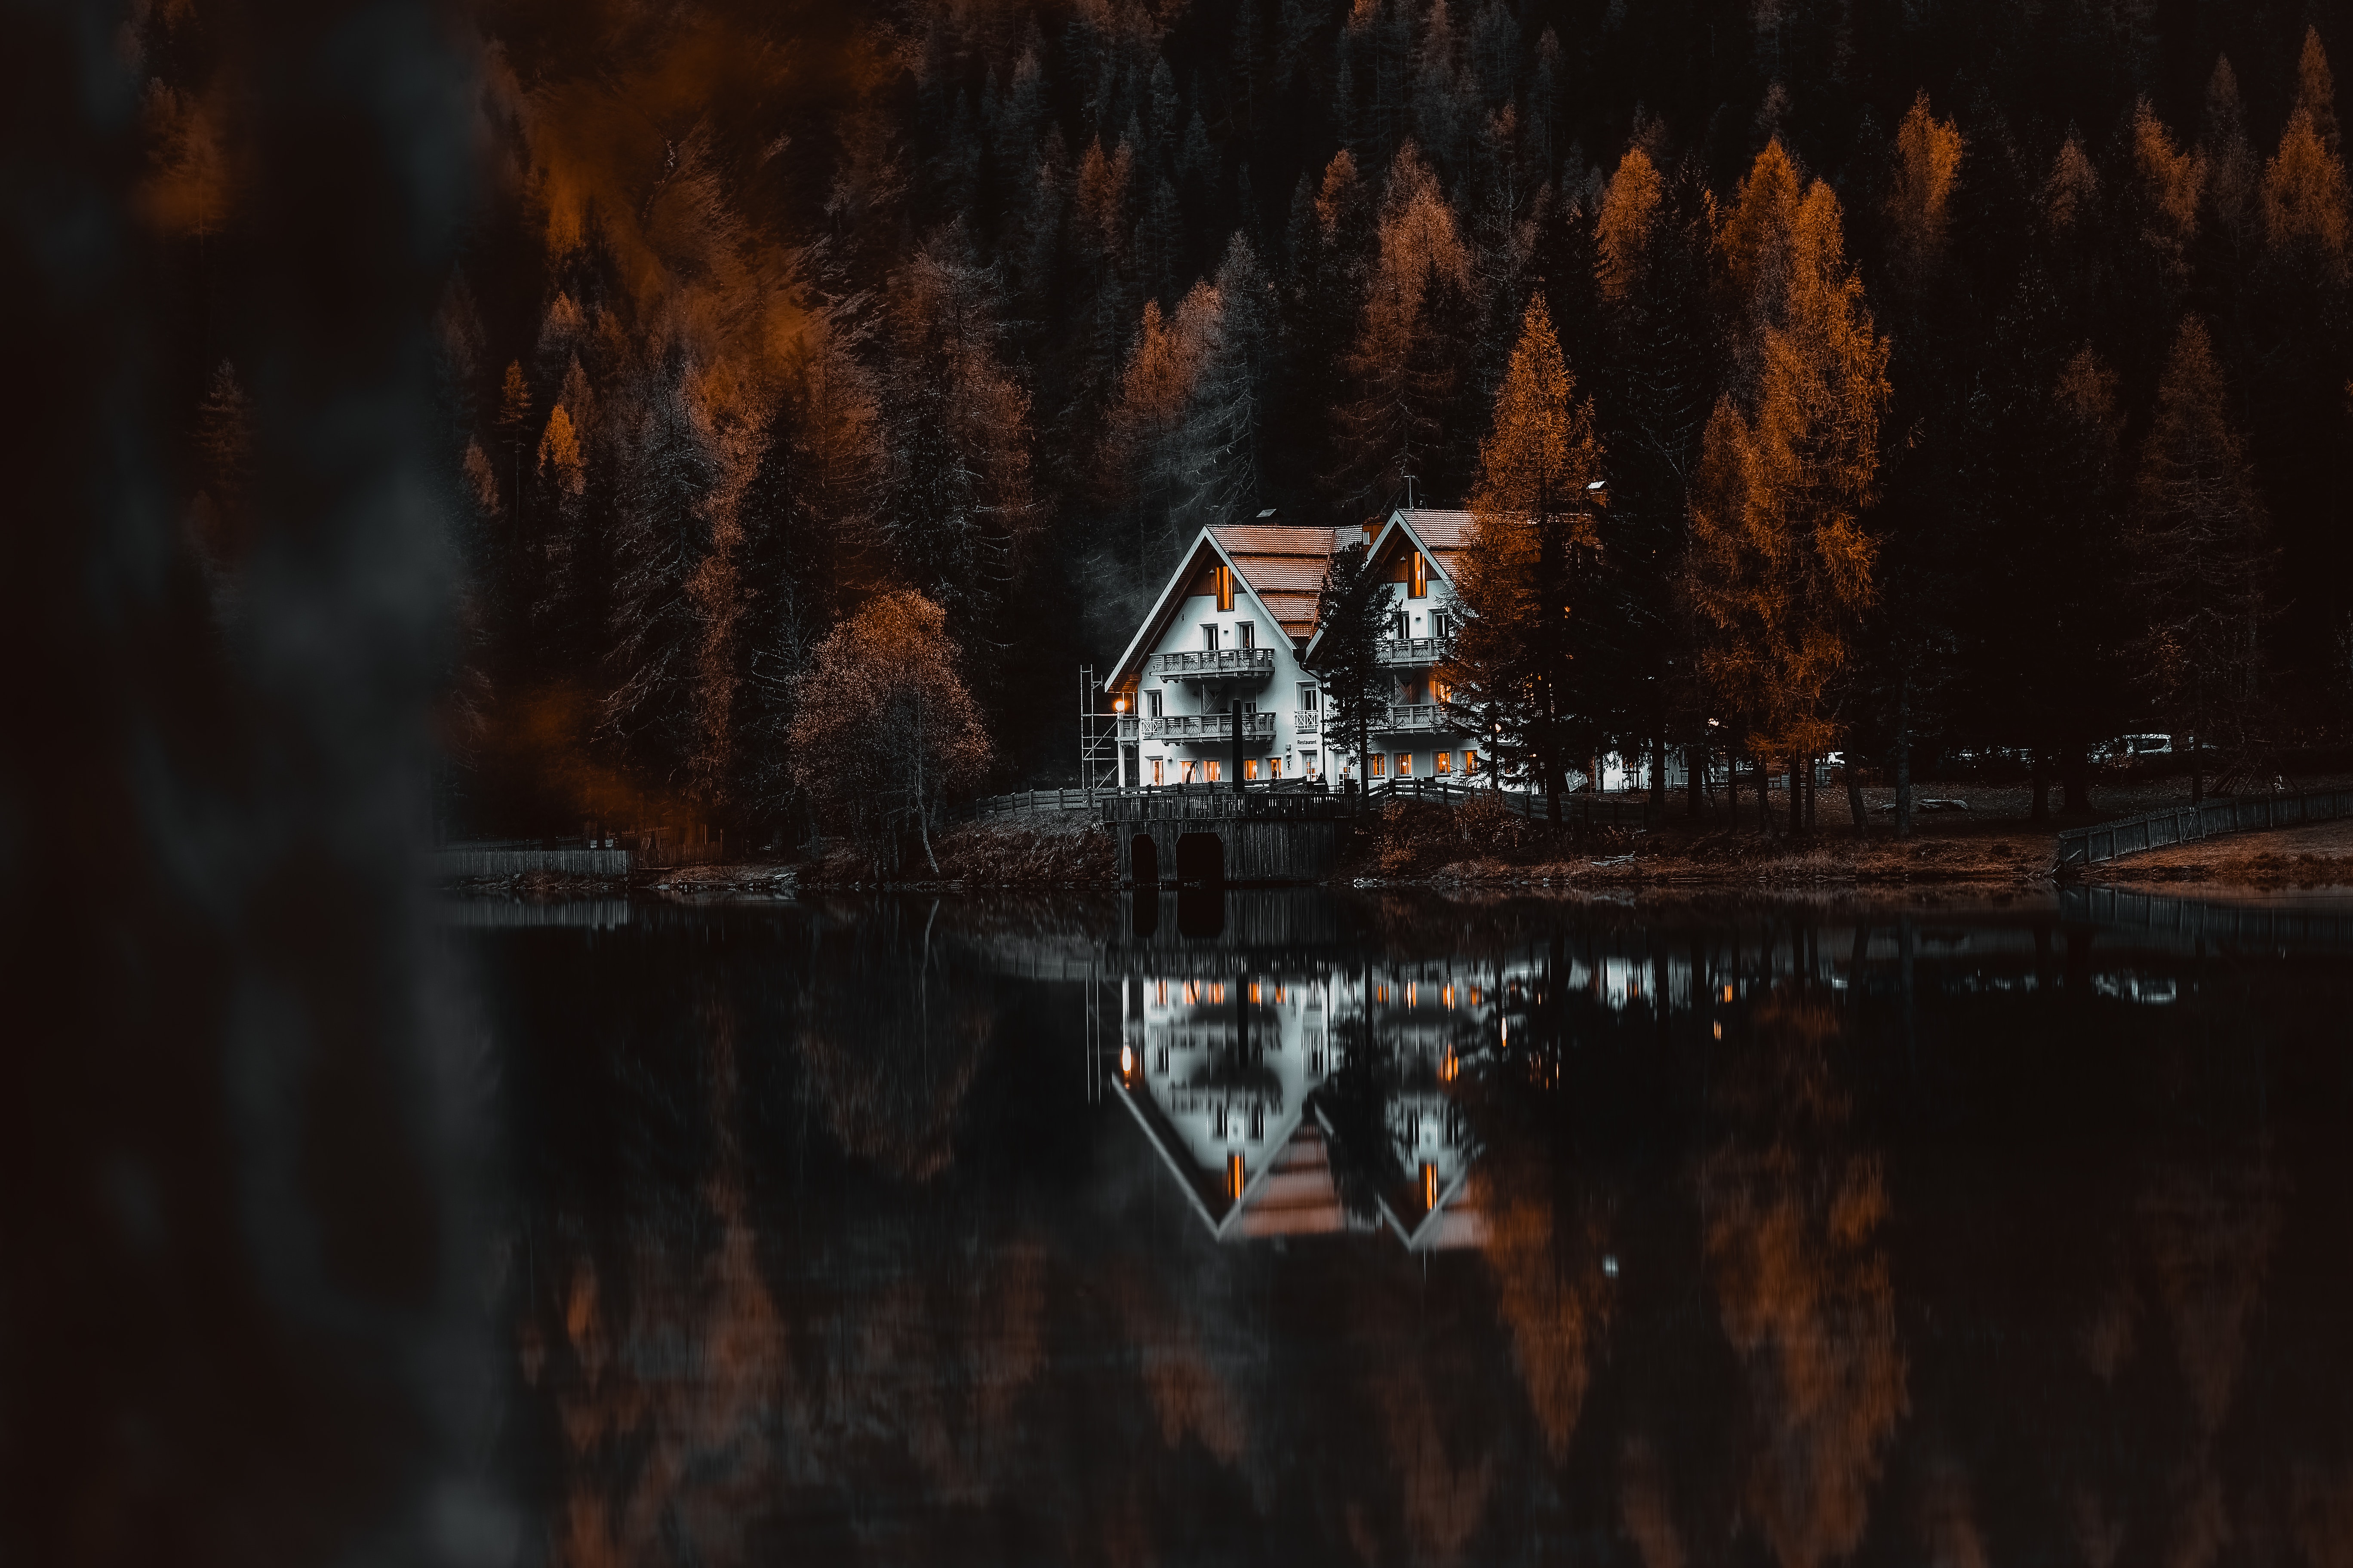 lake, shore, houses, small houses, forest, nature, bank cellphone